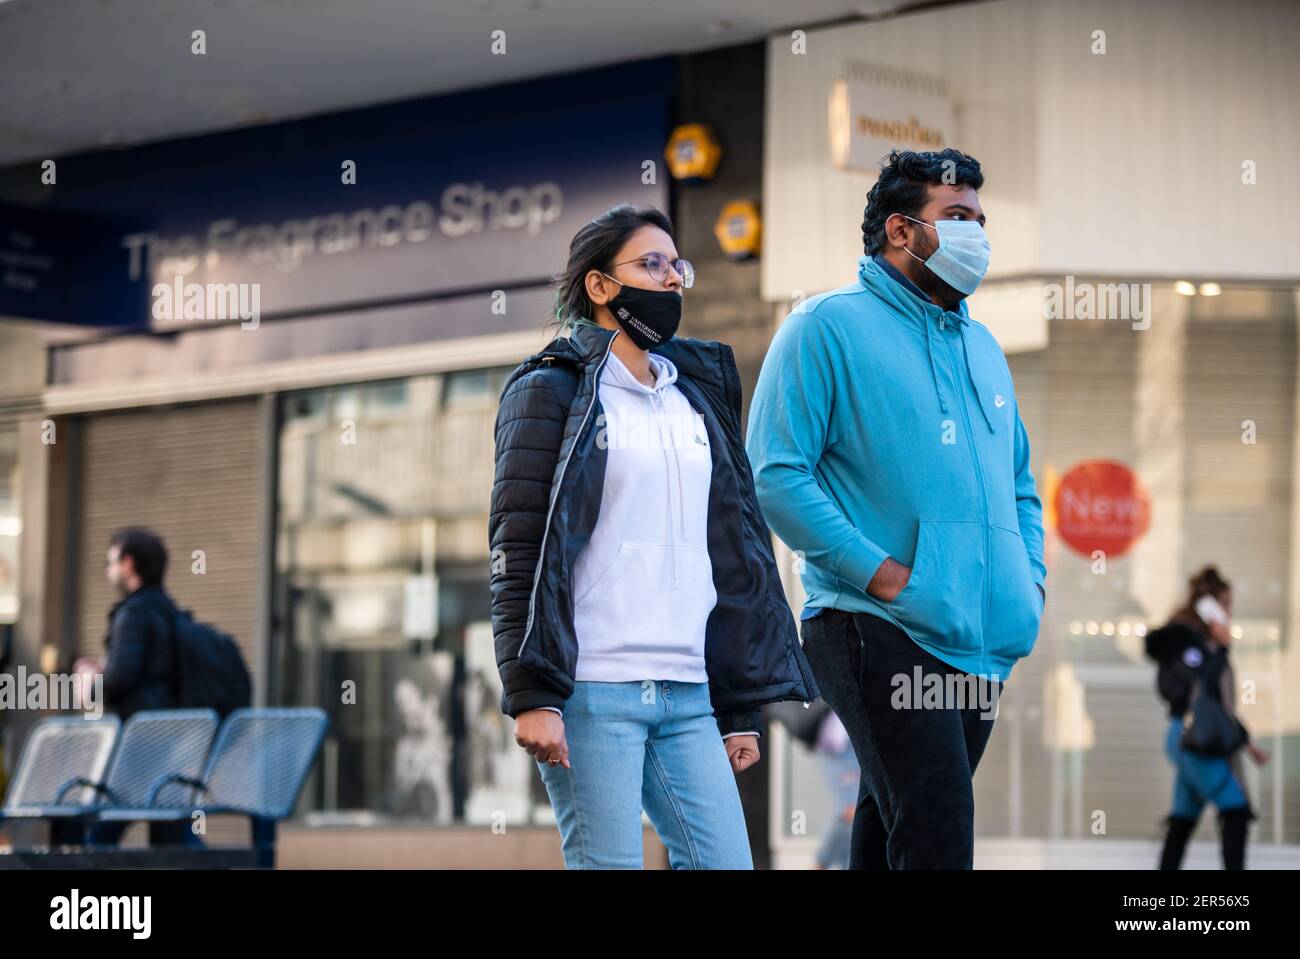 Birmingham, United Kingdom, UK. 28th February 2021: Two students, one wearing a University of Birmingham branded face-mask walk along Birmingham city centre's High Street during a sunny Sunday, the last day of February. Credit: Ryan Underwood / Alamy Live News Stock Photo